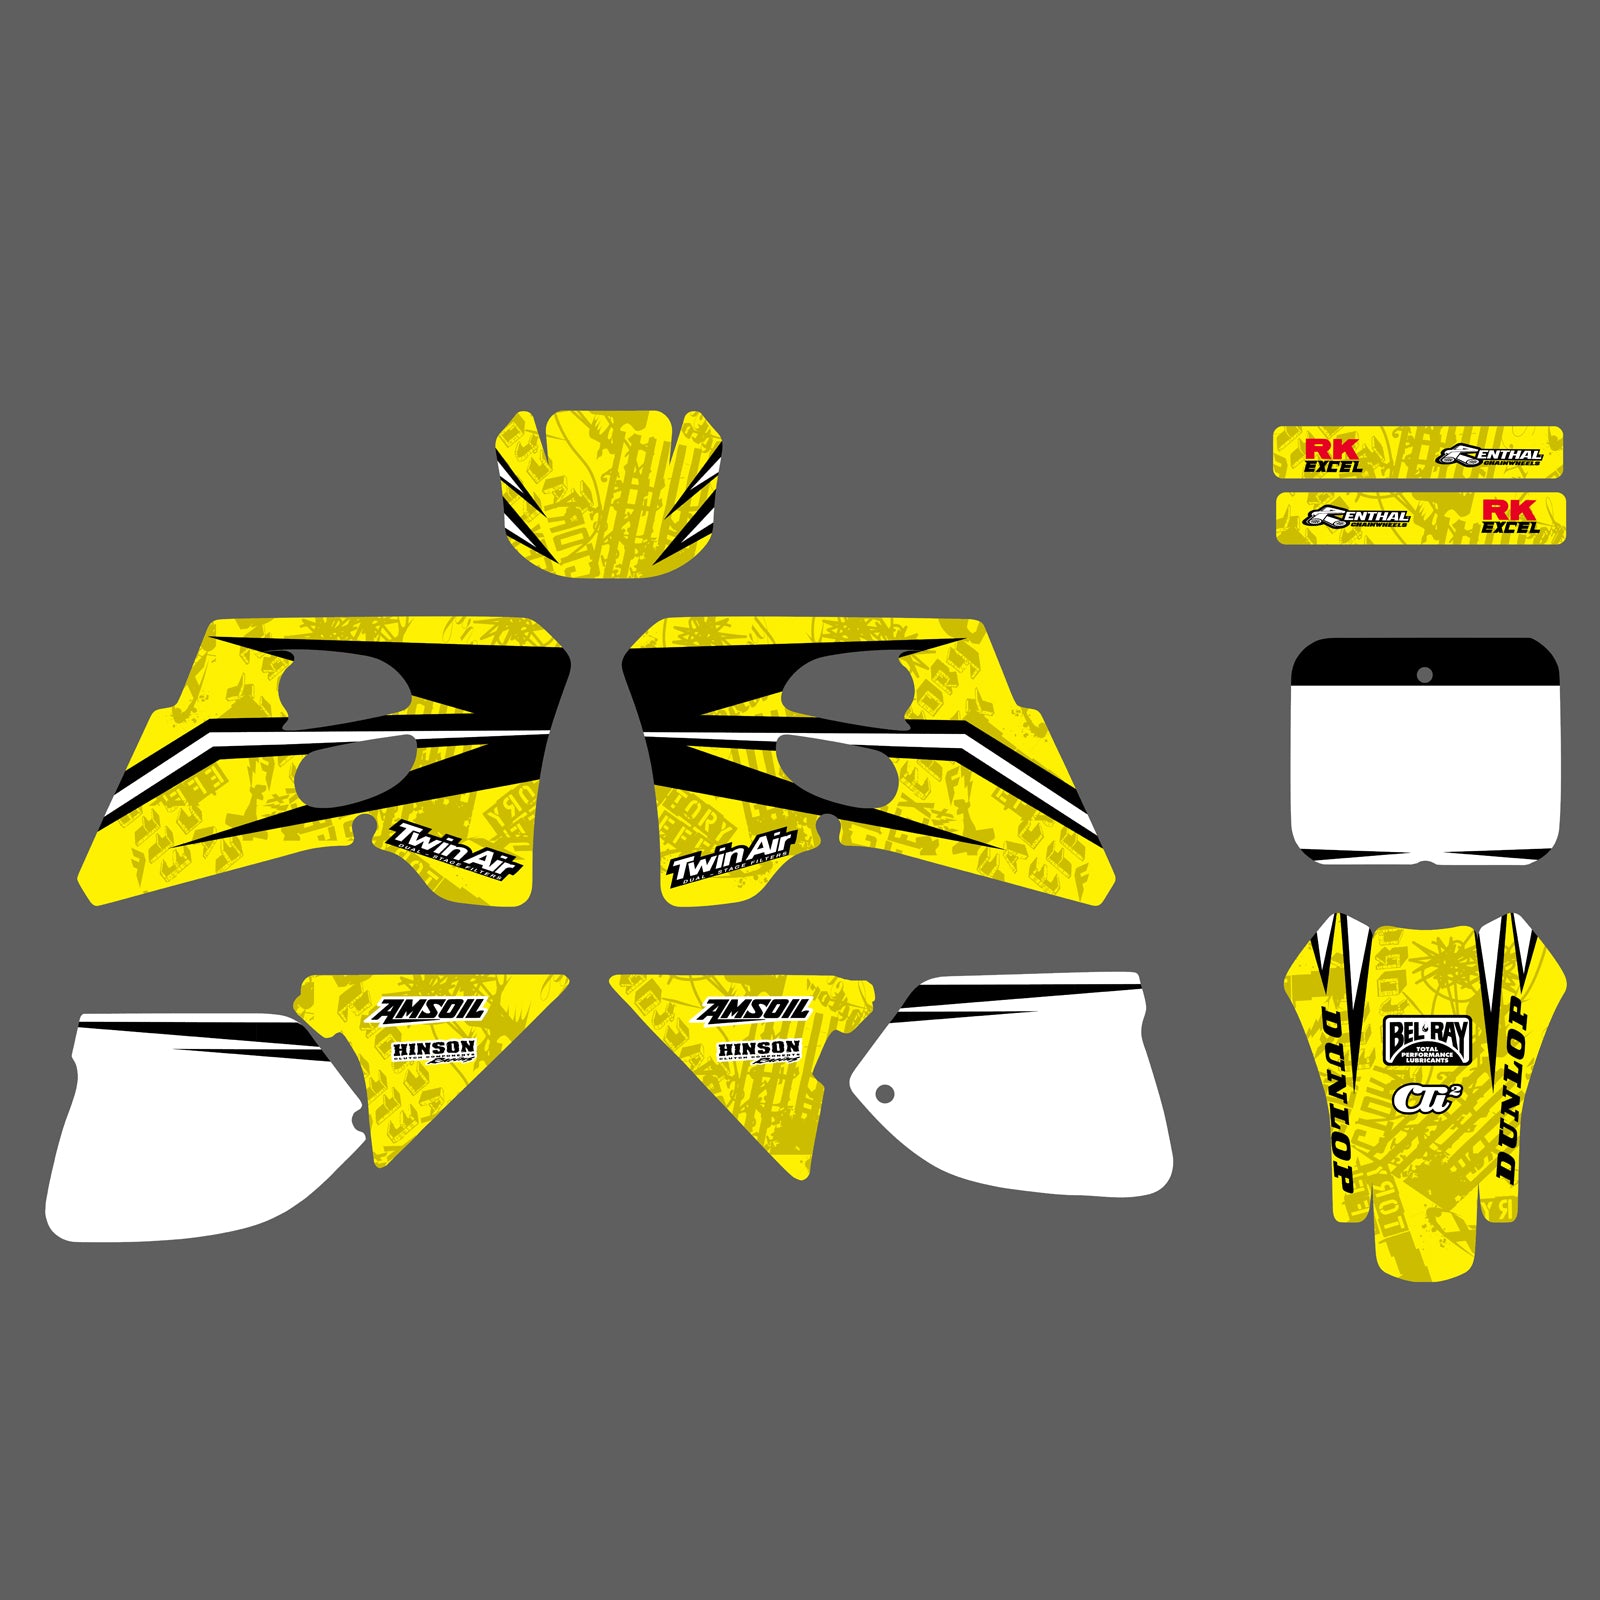 New Personality Team Graphics Kit For Suzuki RM125 RM250 93-95